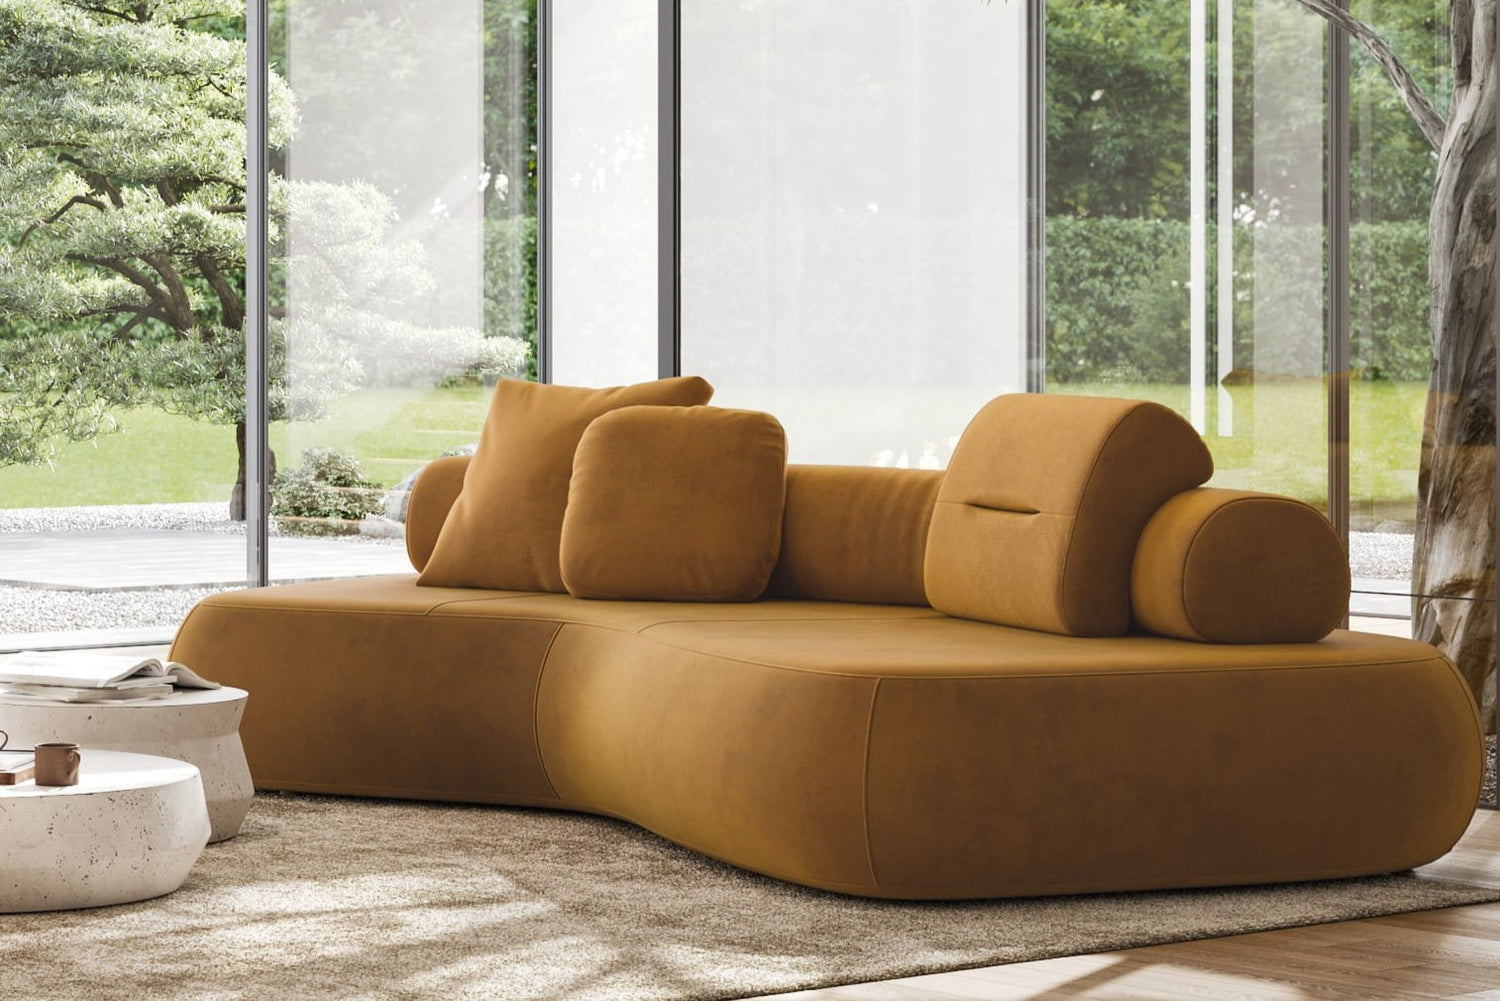 Rolly modern curved sofa in bronze velvet with moveable back roll and cushions by E9 Design